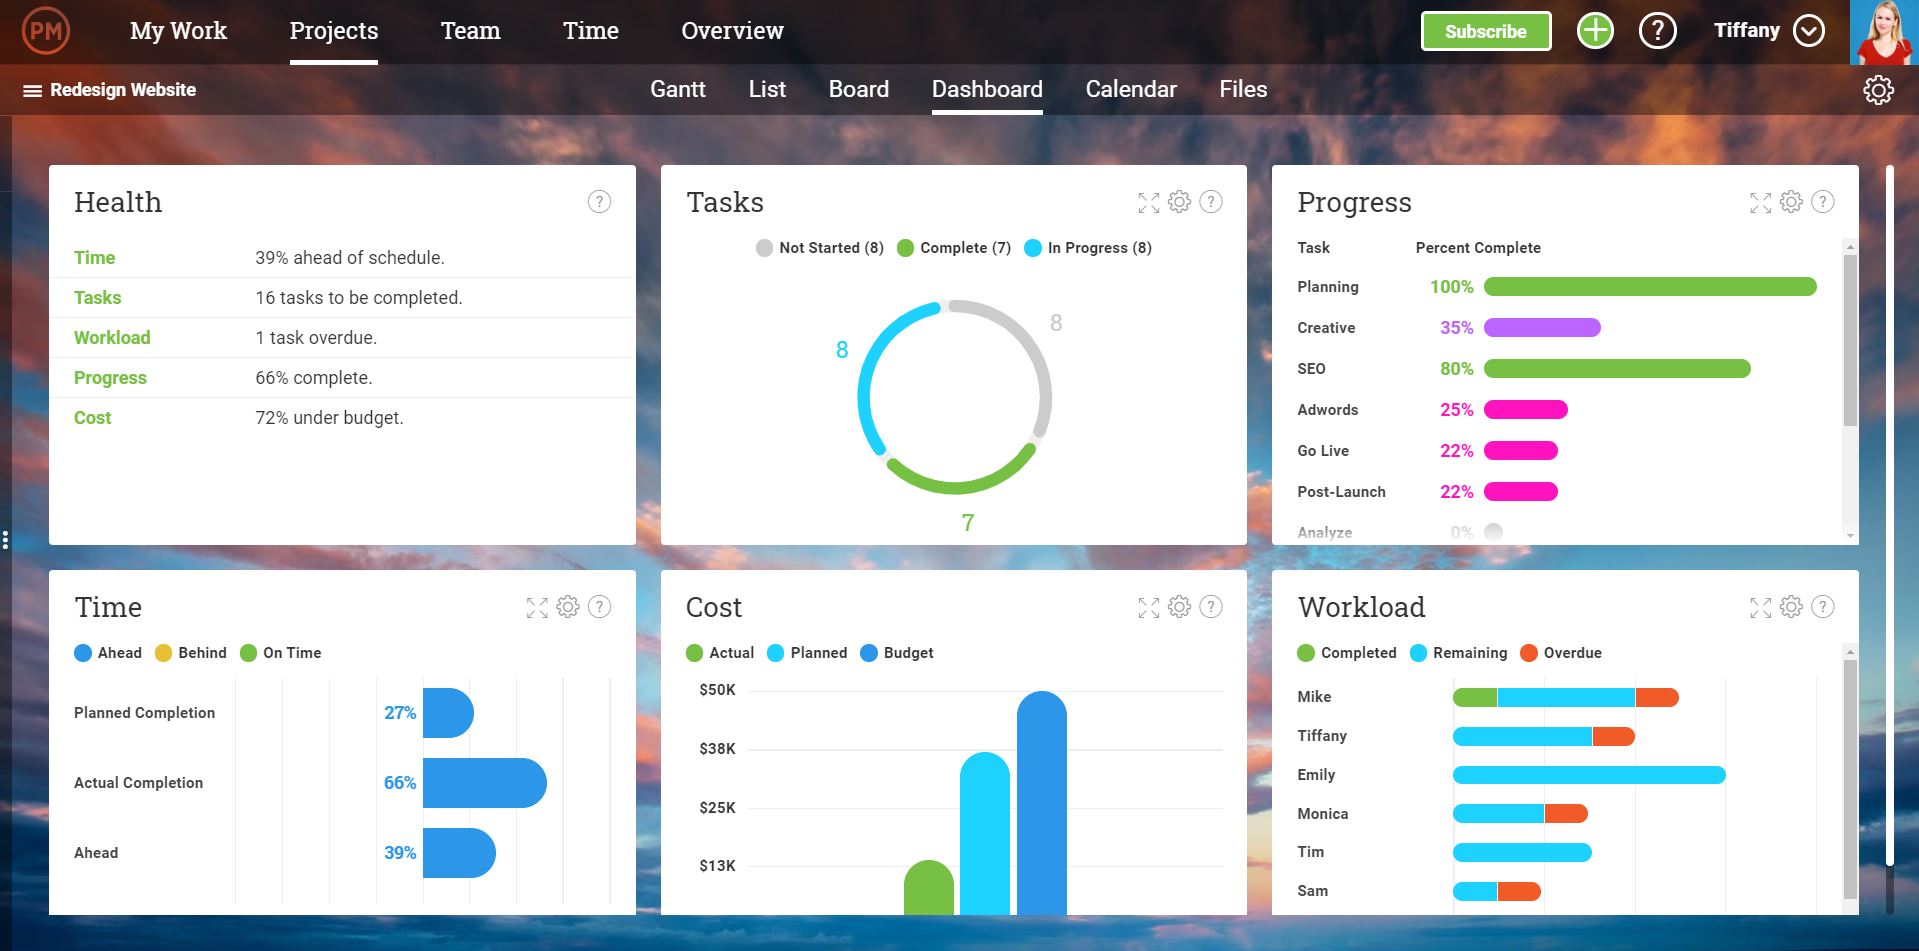 A screenshot of the project dashboard in ProjectManager.com